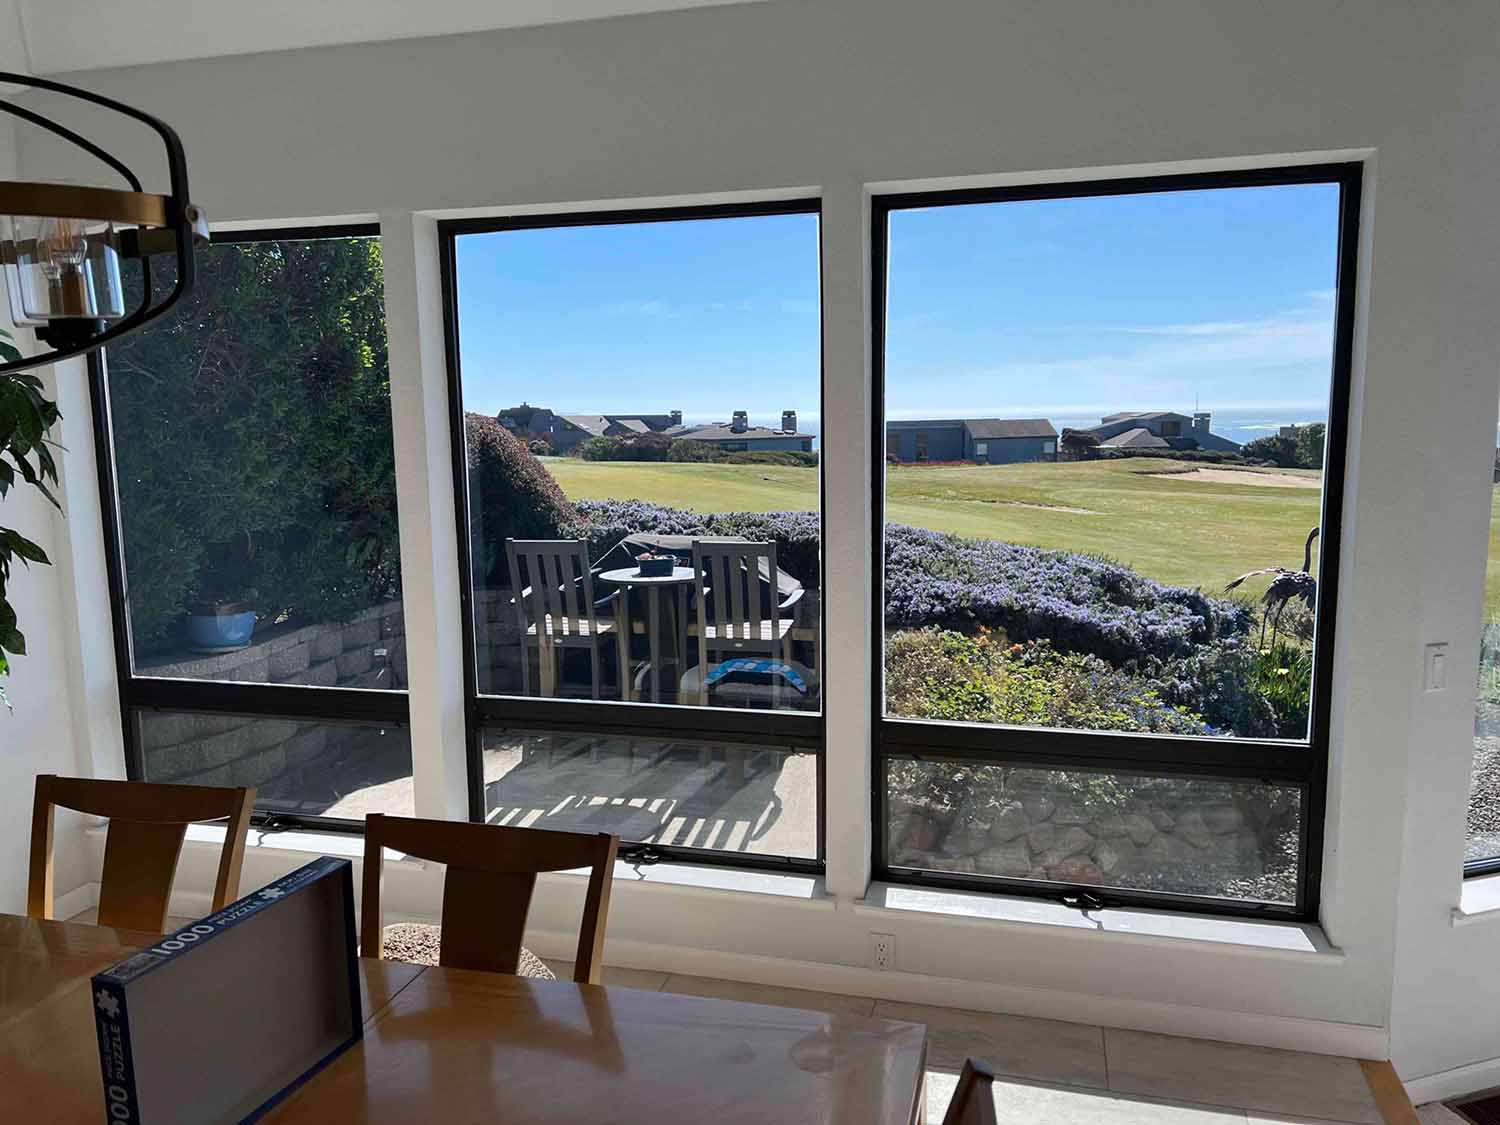 Sun Control Window Film for Bodega Bay Homes, installed by ClimatePro. Get a free estimate today.